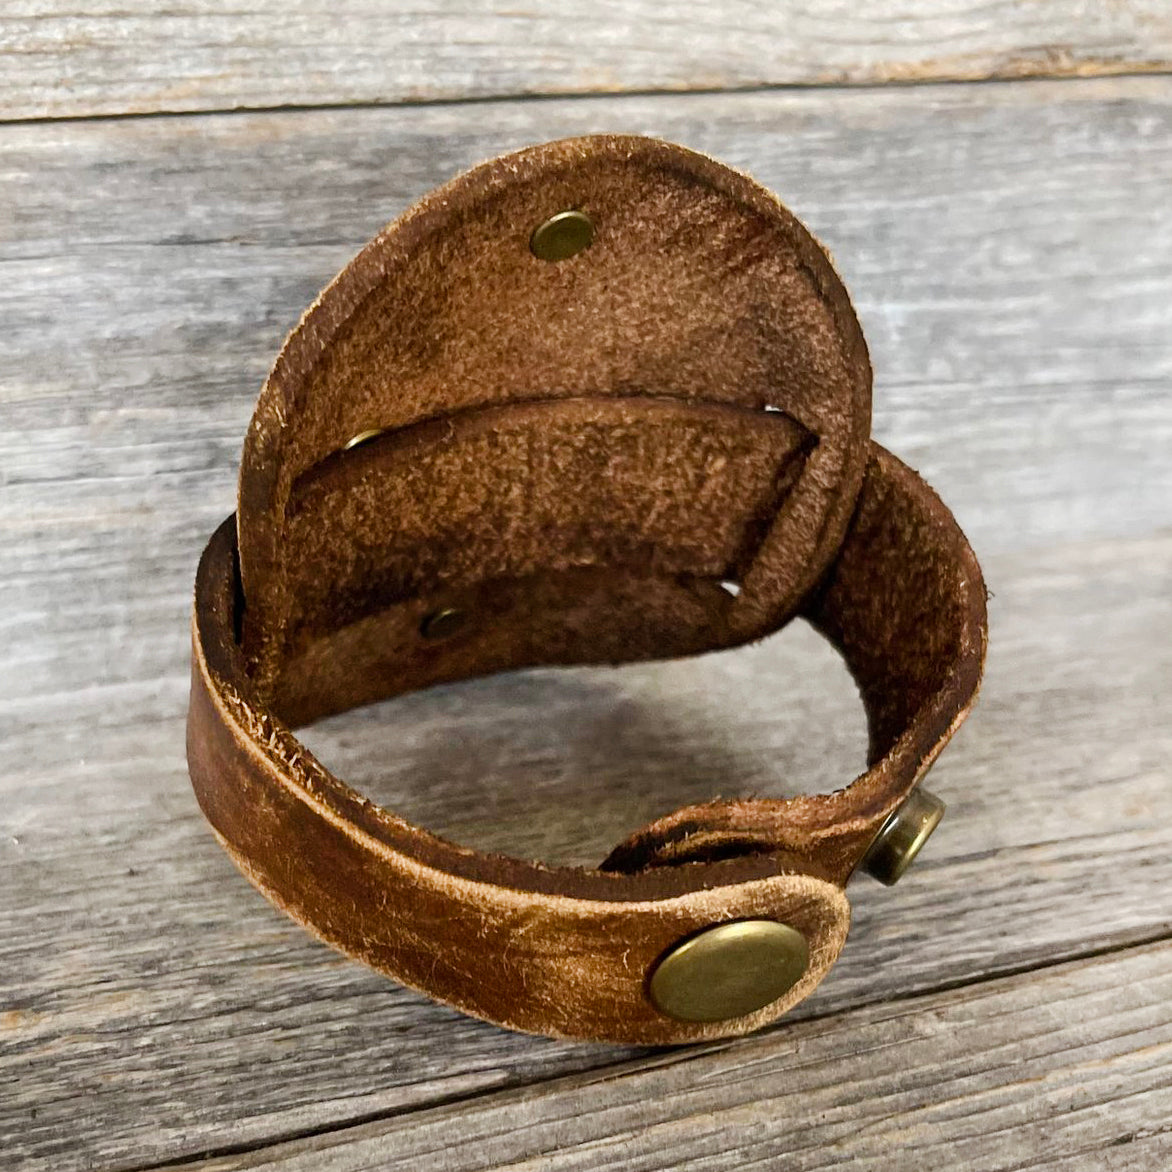 MADE TO ORDER - Patina Cross Leather Bracelet: Bohemian Charm for Wrist Elegance